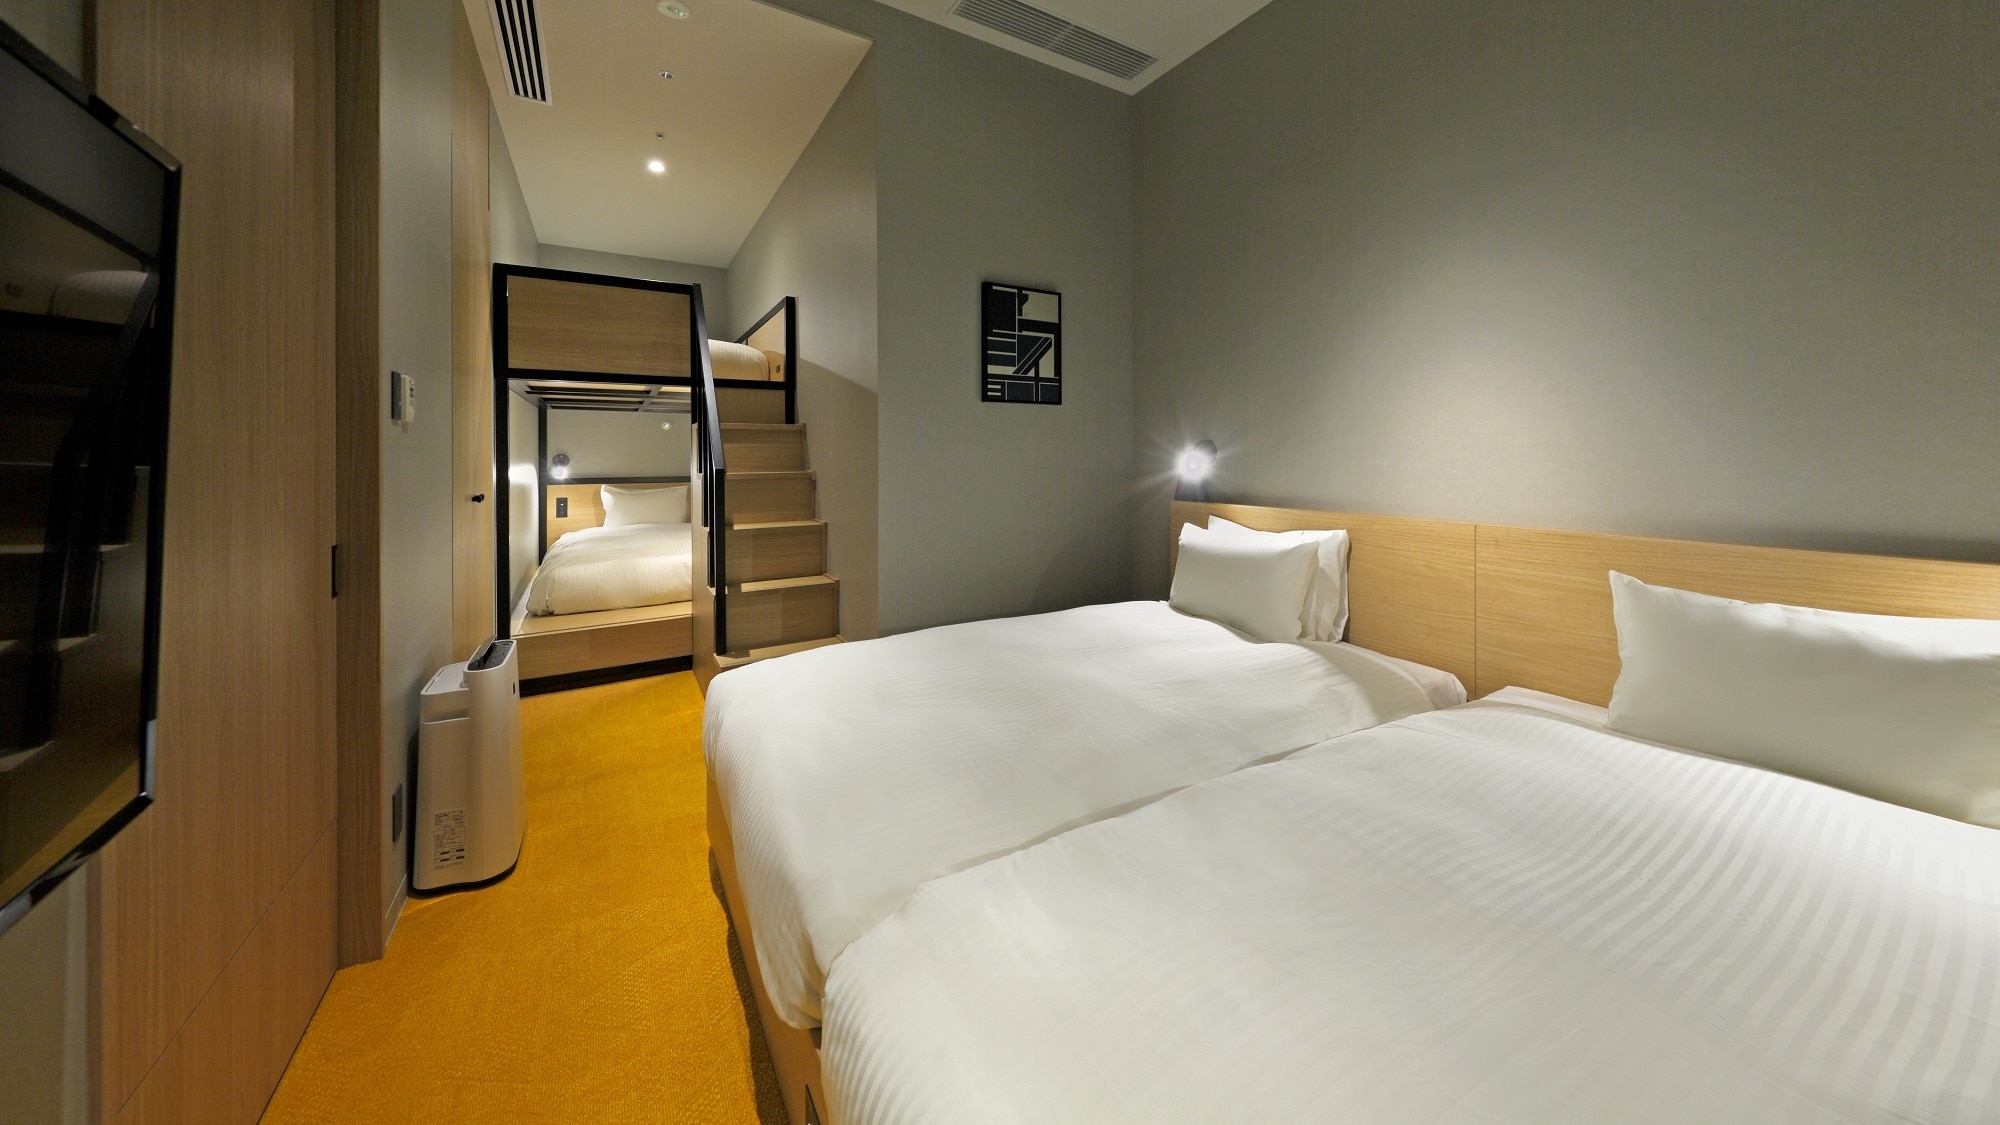 ◆Bunk Bed Room｜Equipped with 2 single beds and 1 bunk bed, it can accommodate up to 4 people.